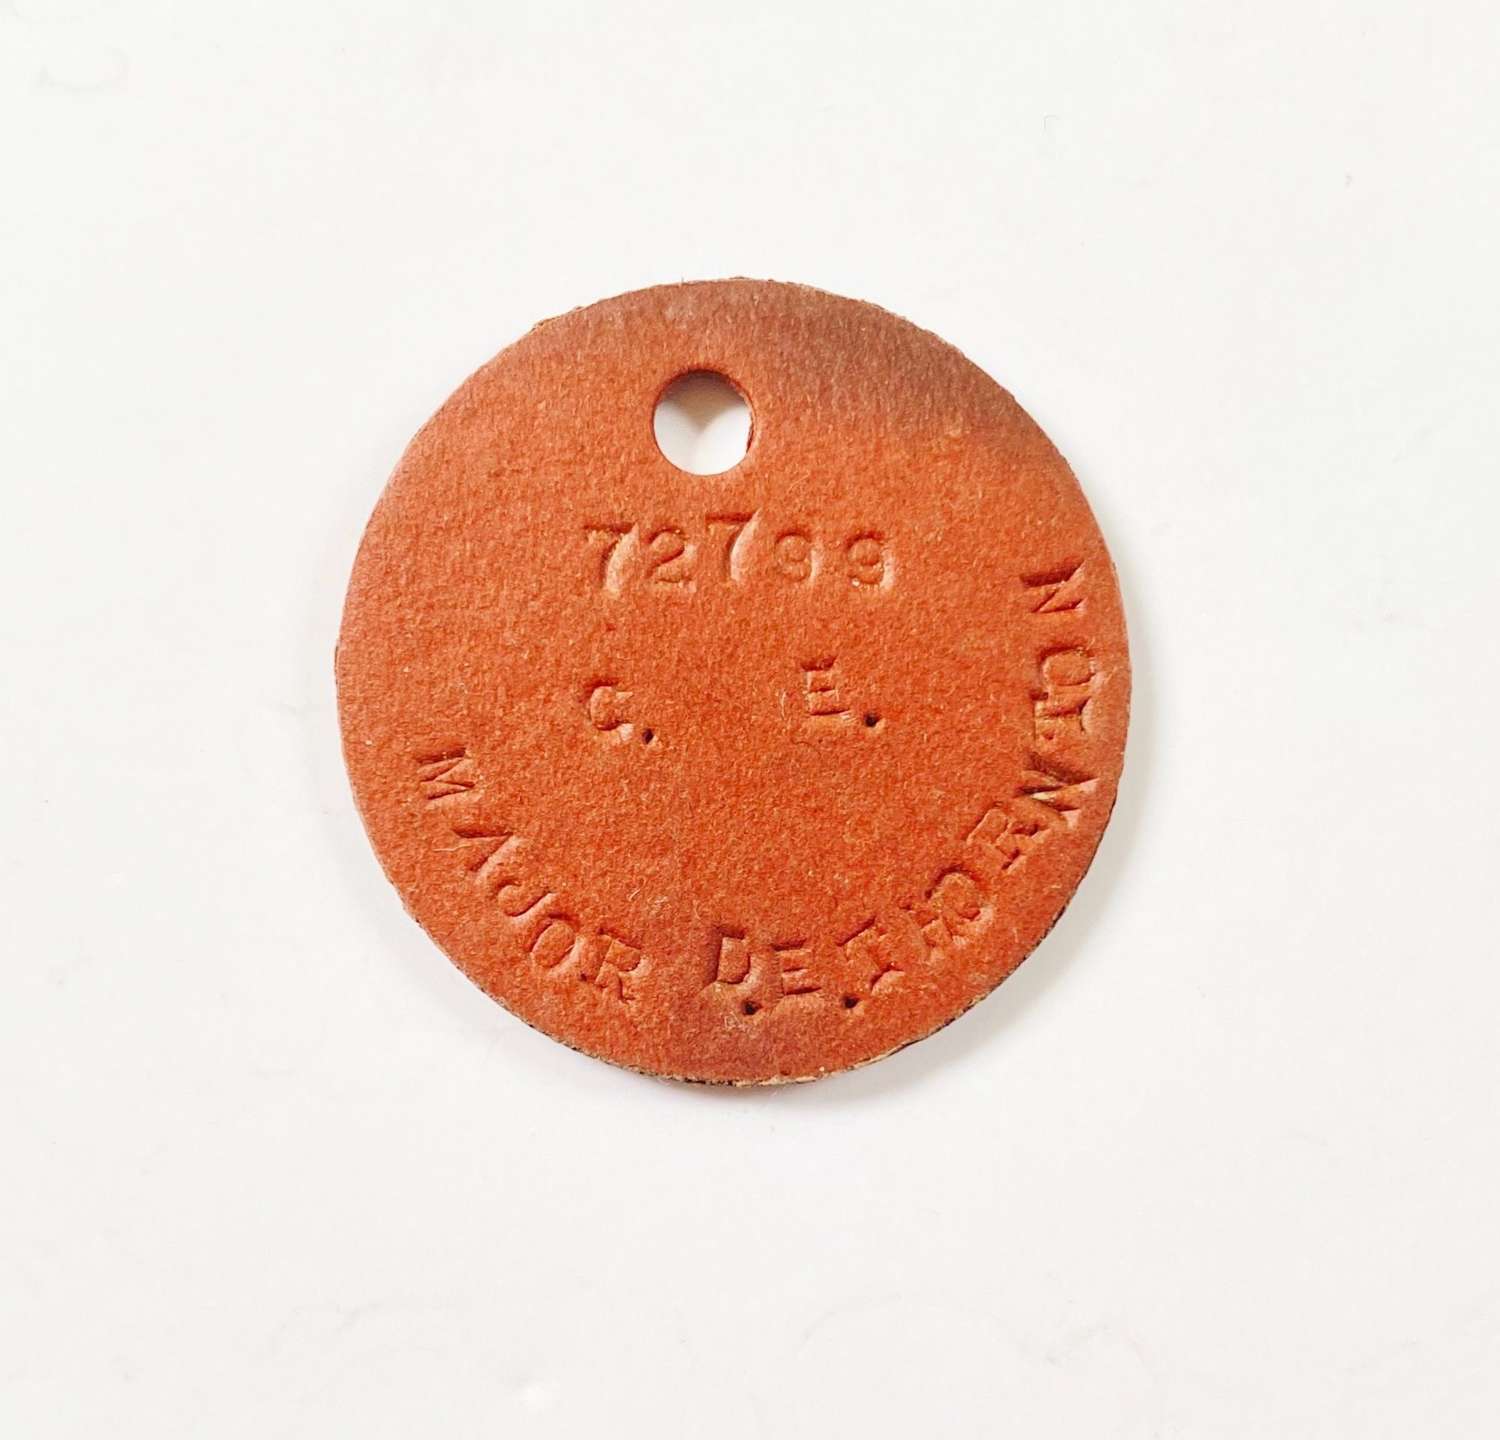 Welch Regiment Officer’s ID Dog Tag.